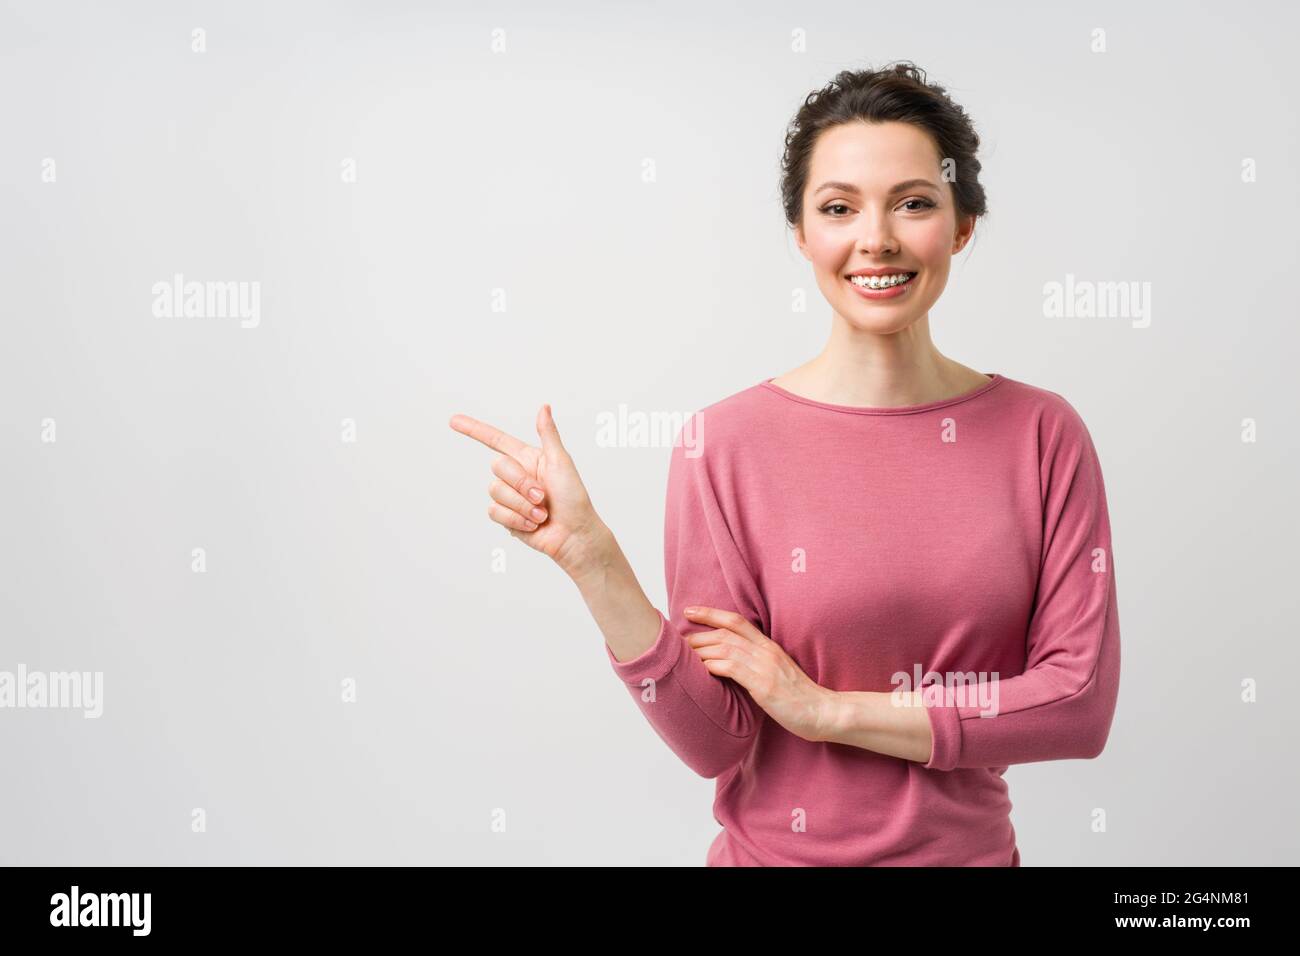 A young woman with braces on her teeth, smiles and points to the copy space with a hand gesture Stock Photo